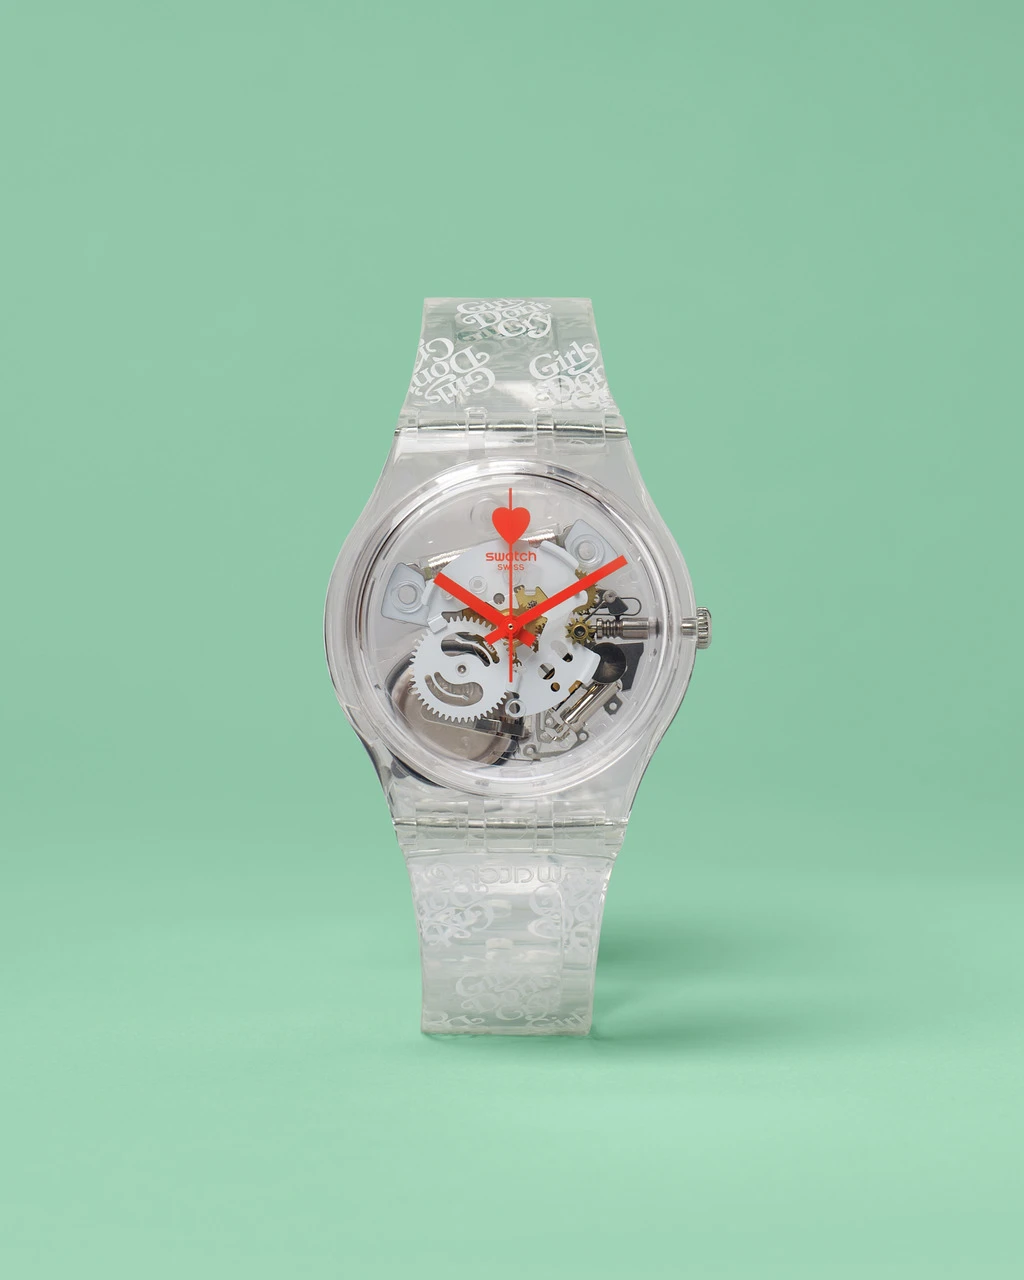 A transparent mechanical wristwatch with intricate gears visible inside, and red watch hands, against a soft green background. the watch band and case feature a white, ornate design.